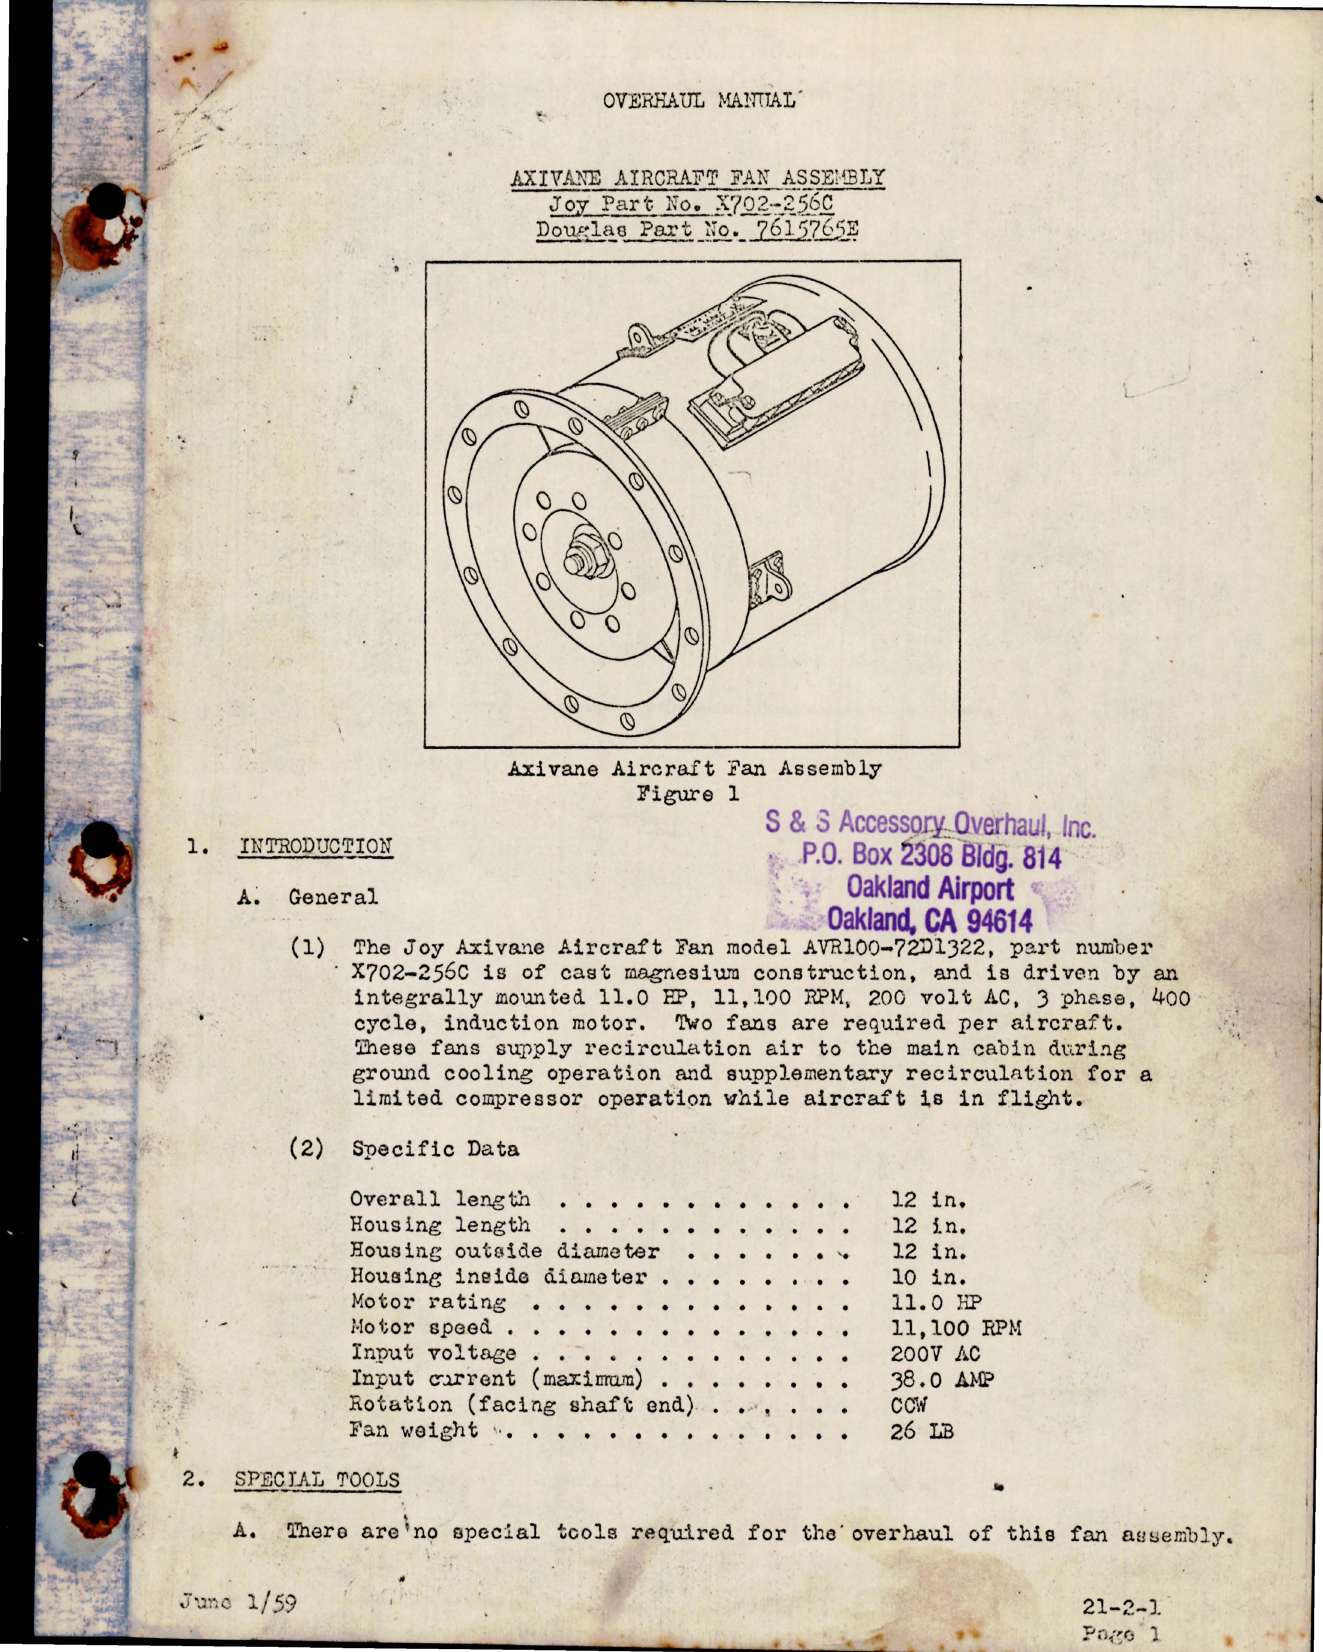 Sample page 1 from AirCorps Library document: Overhaul Manual for Axivane Fan Assembly - Joy Part X702-256C - Douglas Part 7615765E